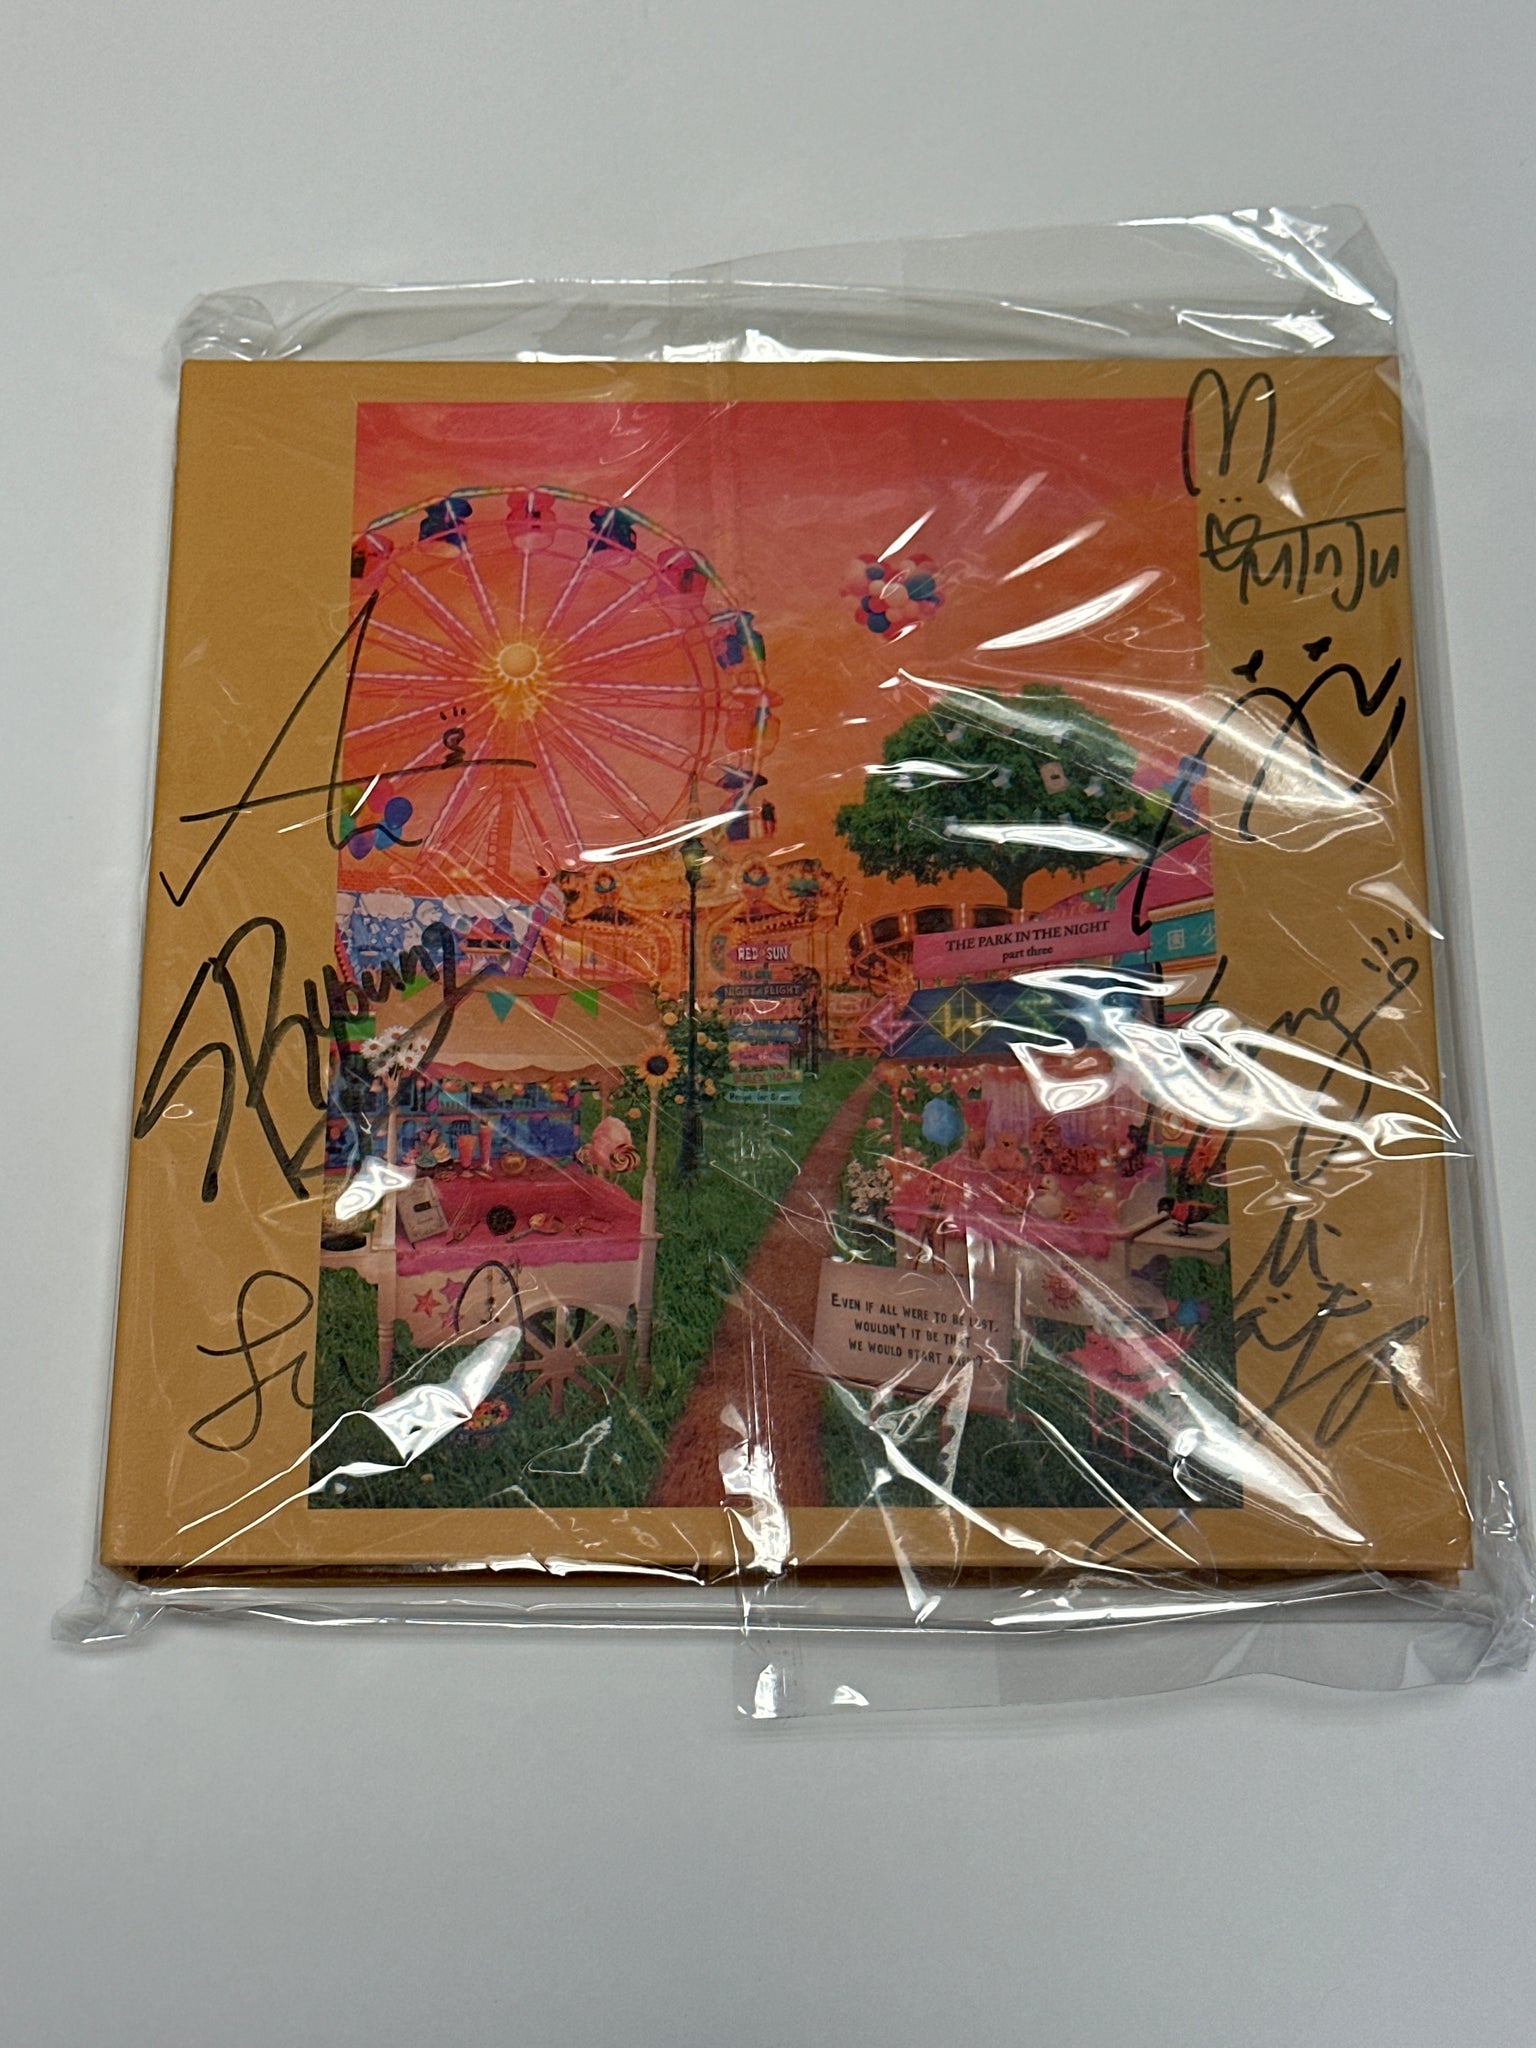 GWSN - THE PARK IN THE NIGHT) part three | AUTOGRAPHED ALBUM